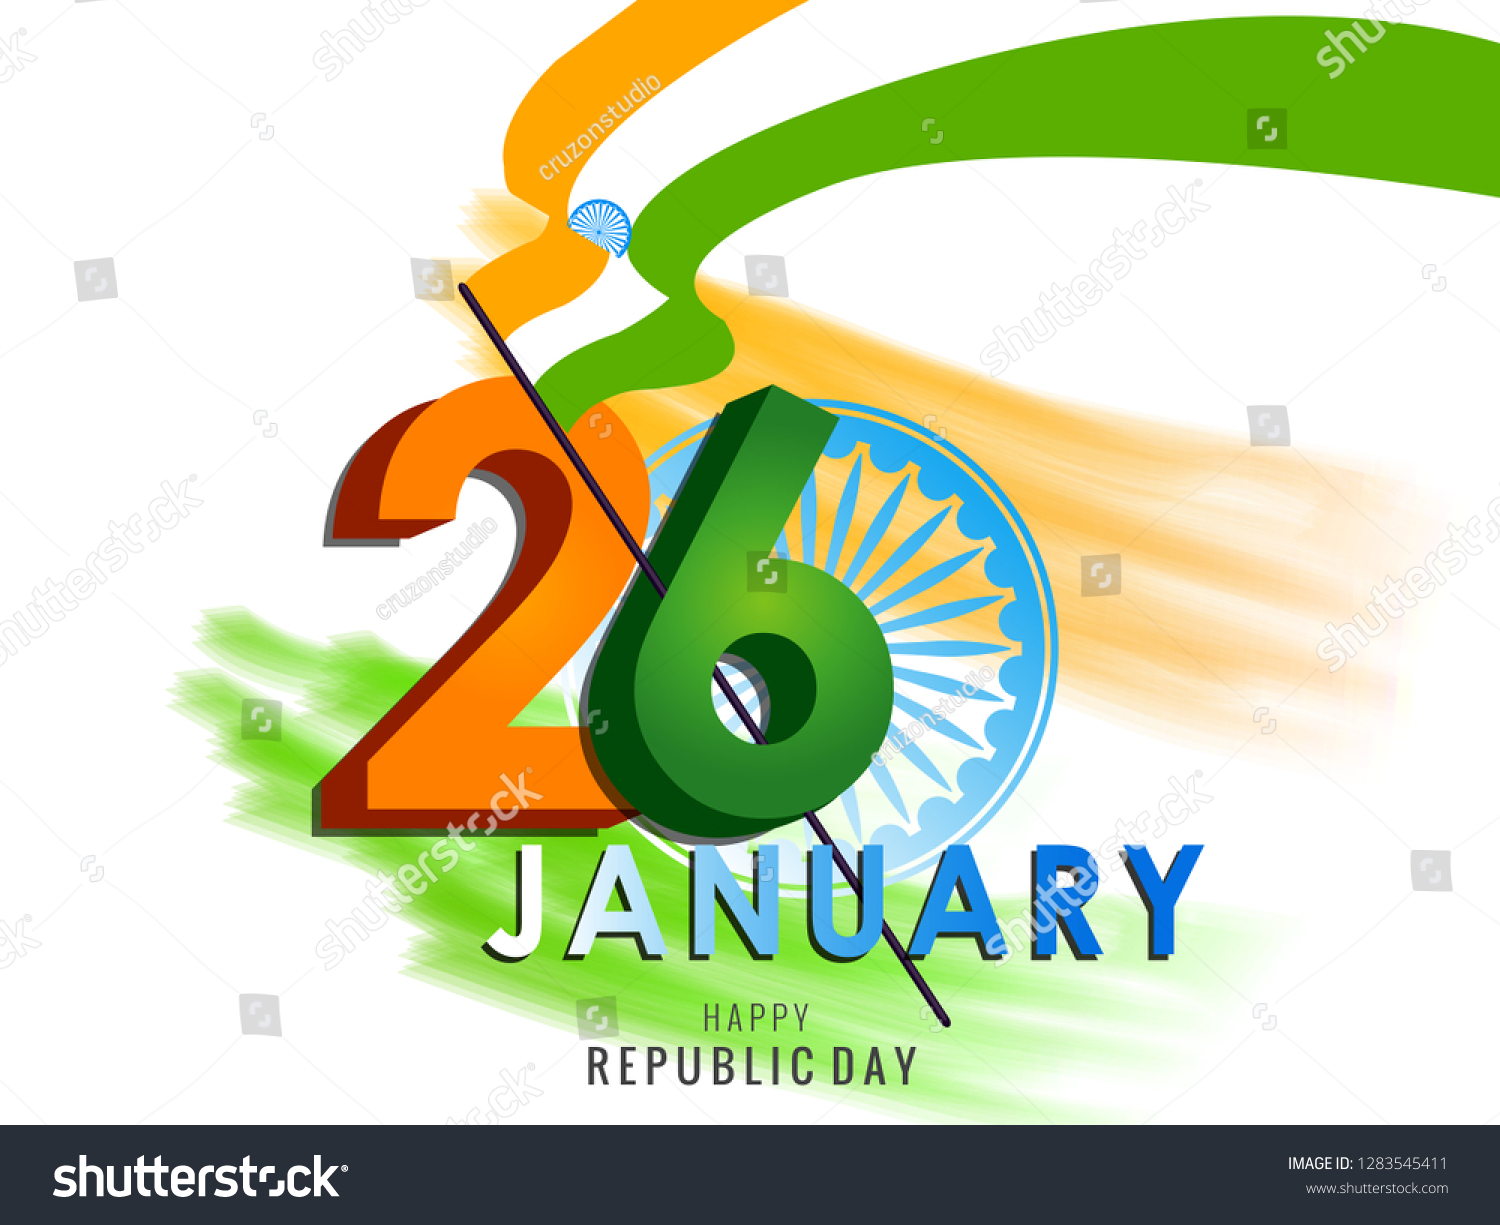 Featured image of post 26 January Poster Design - January 26, 2021.reading time less than 1 minute.